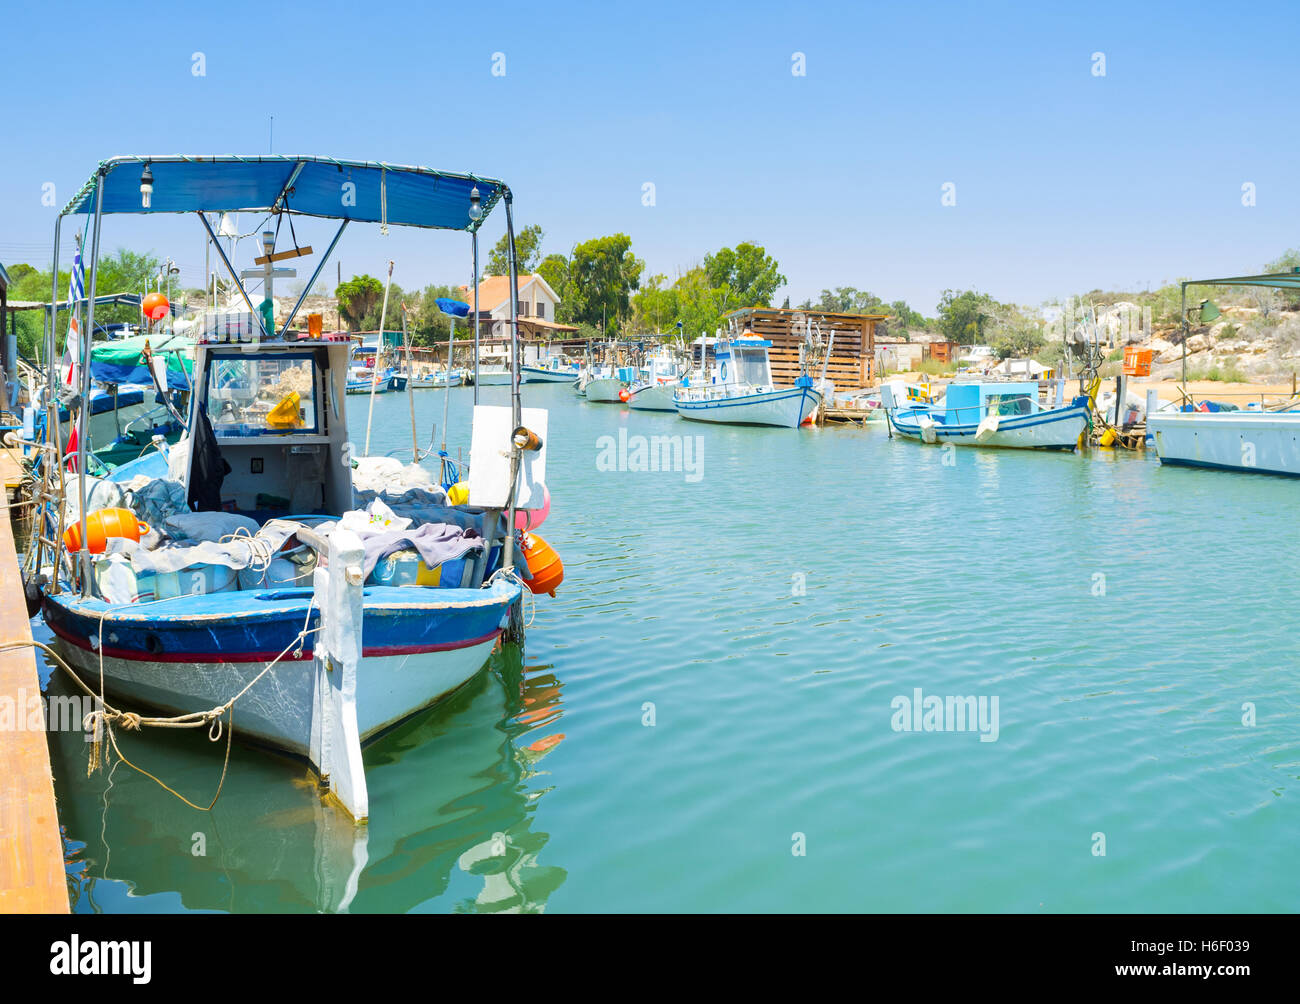 The fishing village of Liopetri with many old boats, moored on the river banks, Cyprus. Stock Photo